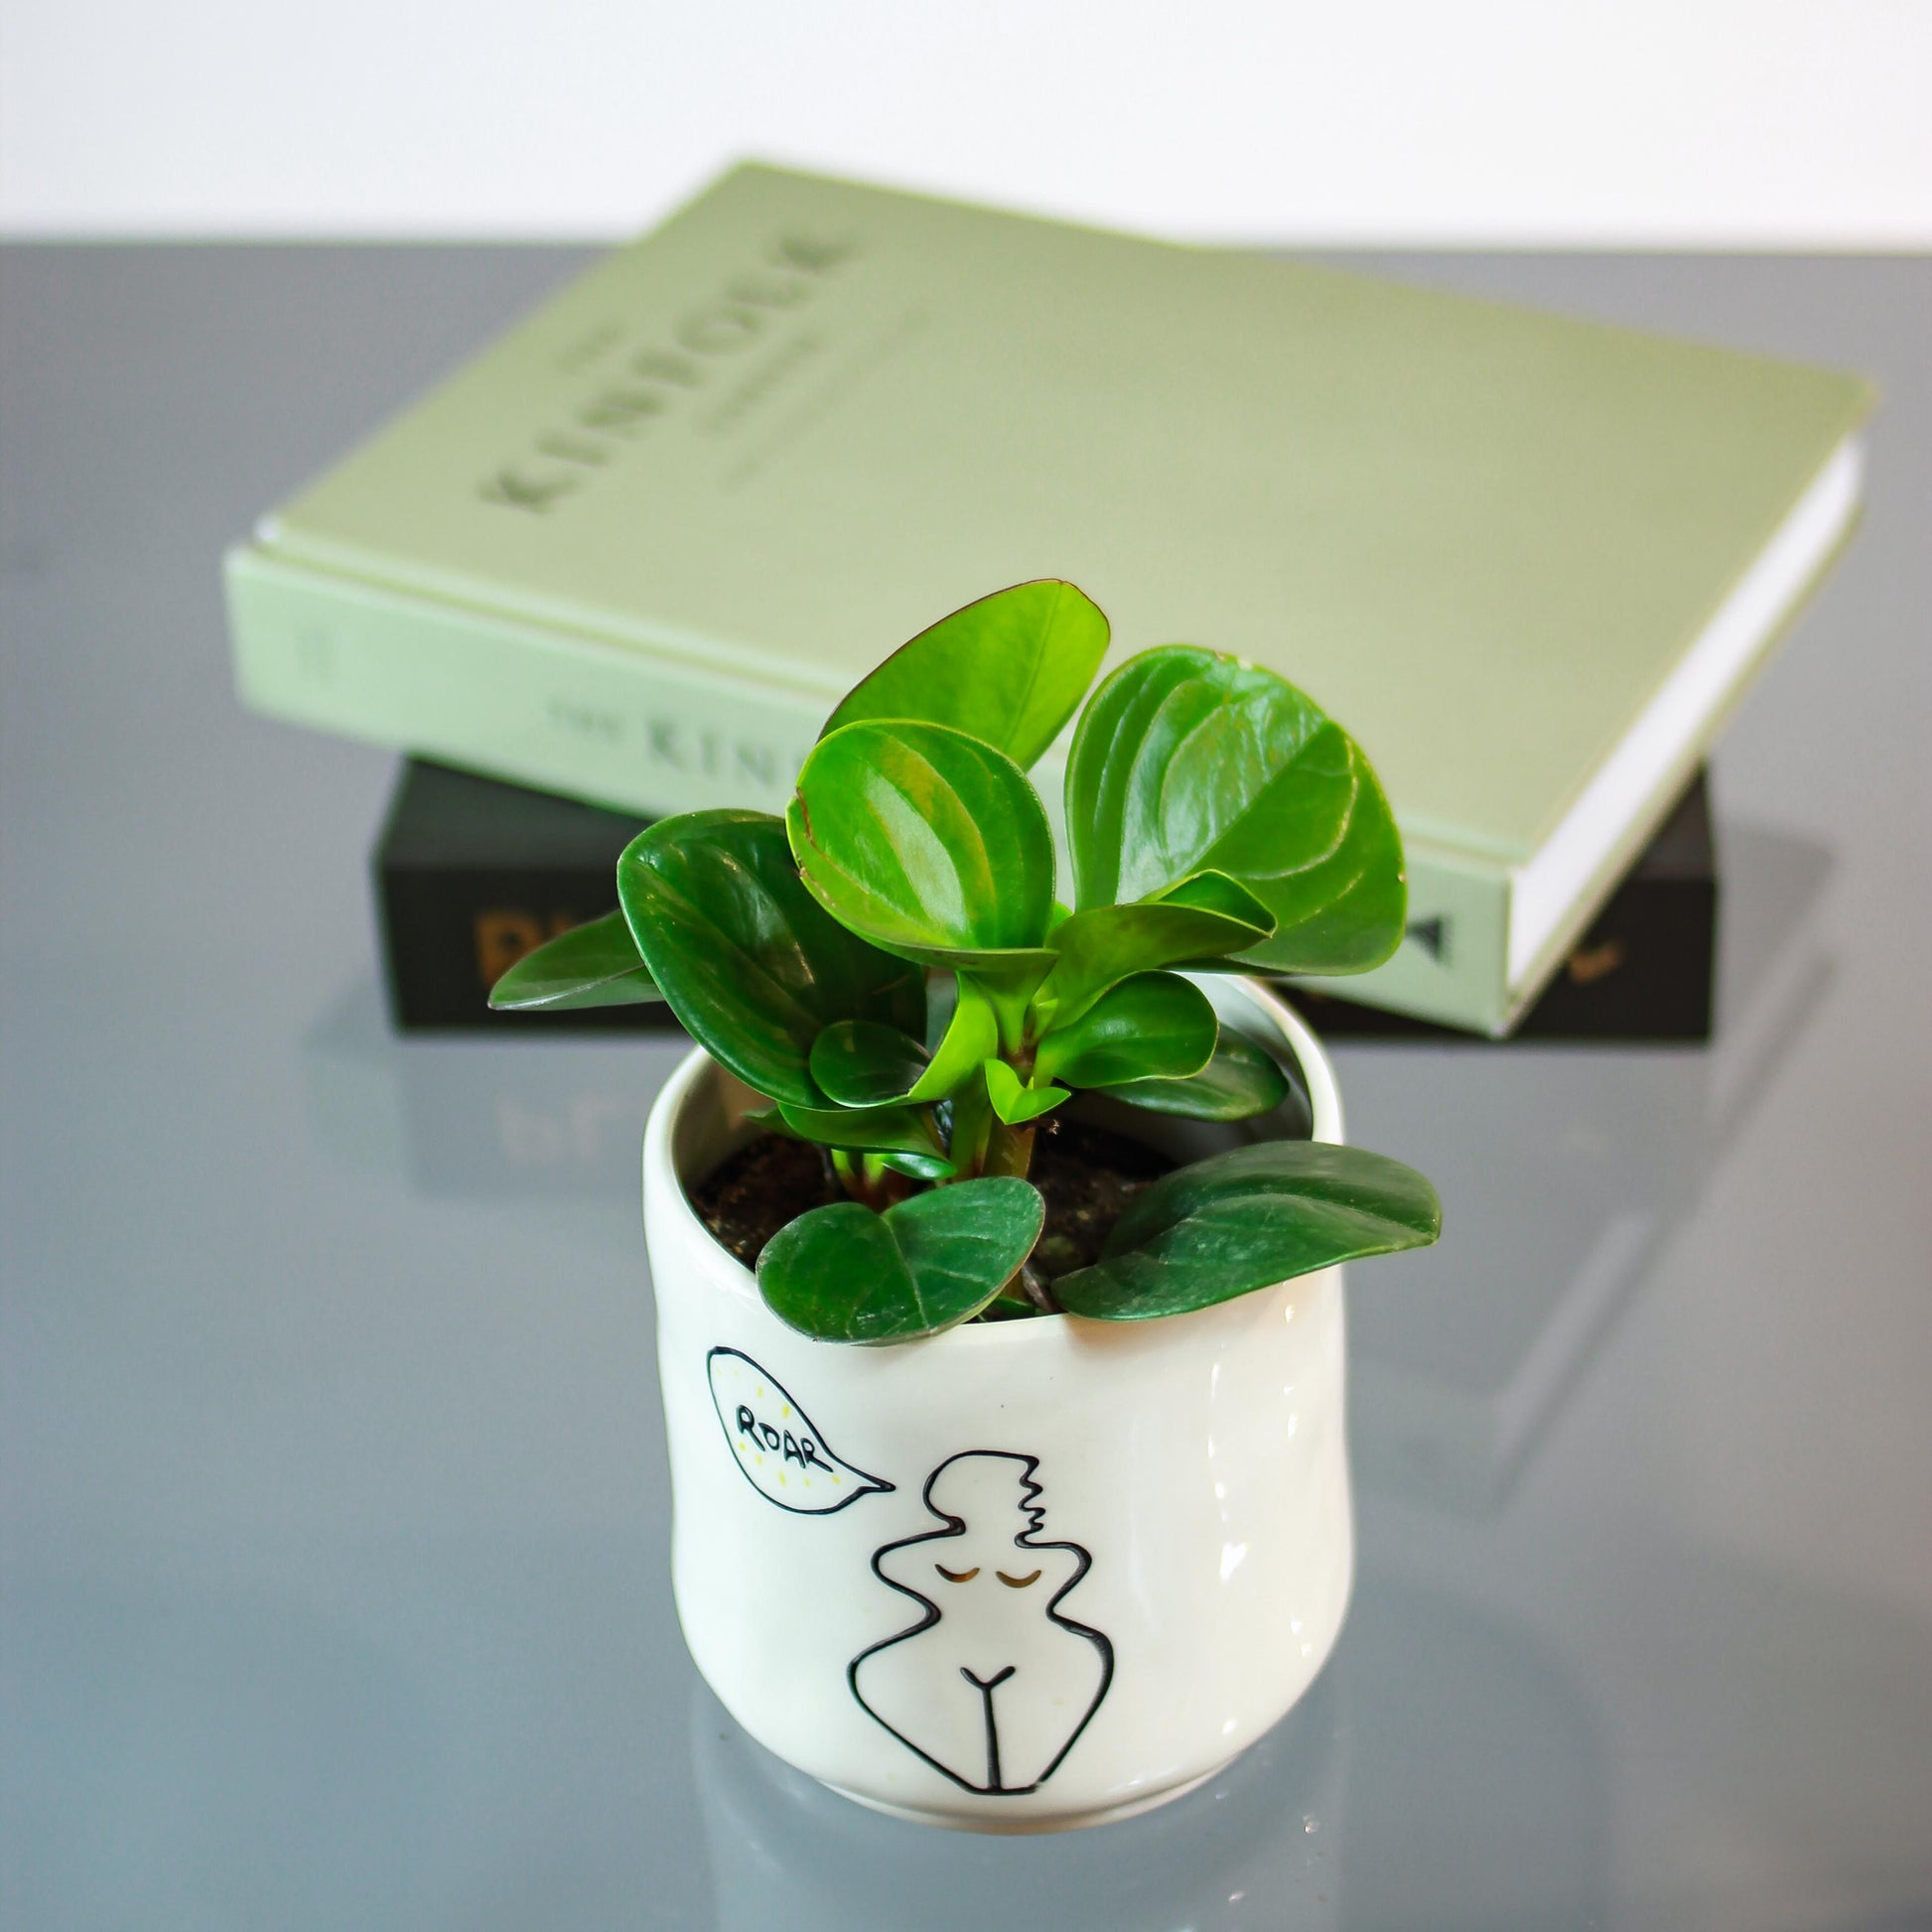 Green Baby Rubber Plant (Peperomia obtusifolia 'Red Edge') in a 4 inch pot. Indoor plant for sale by Promise Supply for delivery and pickup in Toronto